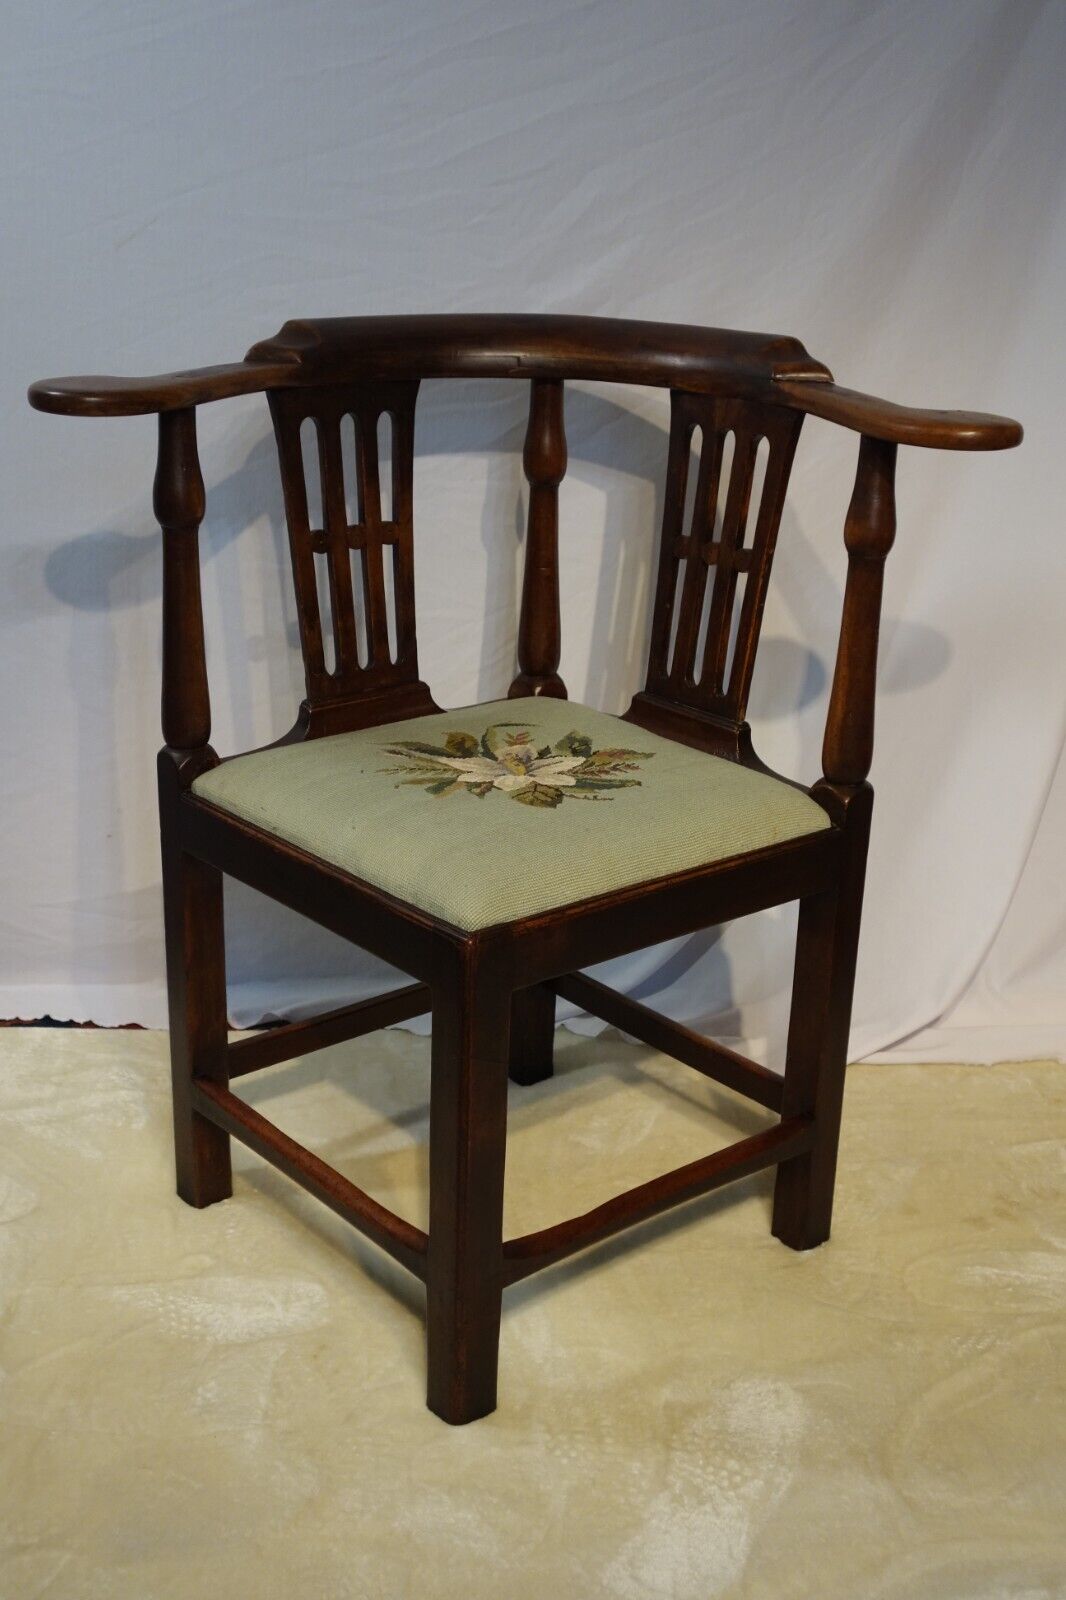 18th century Mahogany Corner chair with tapestry Seat